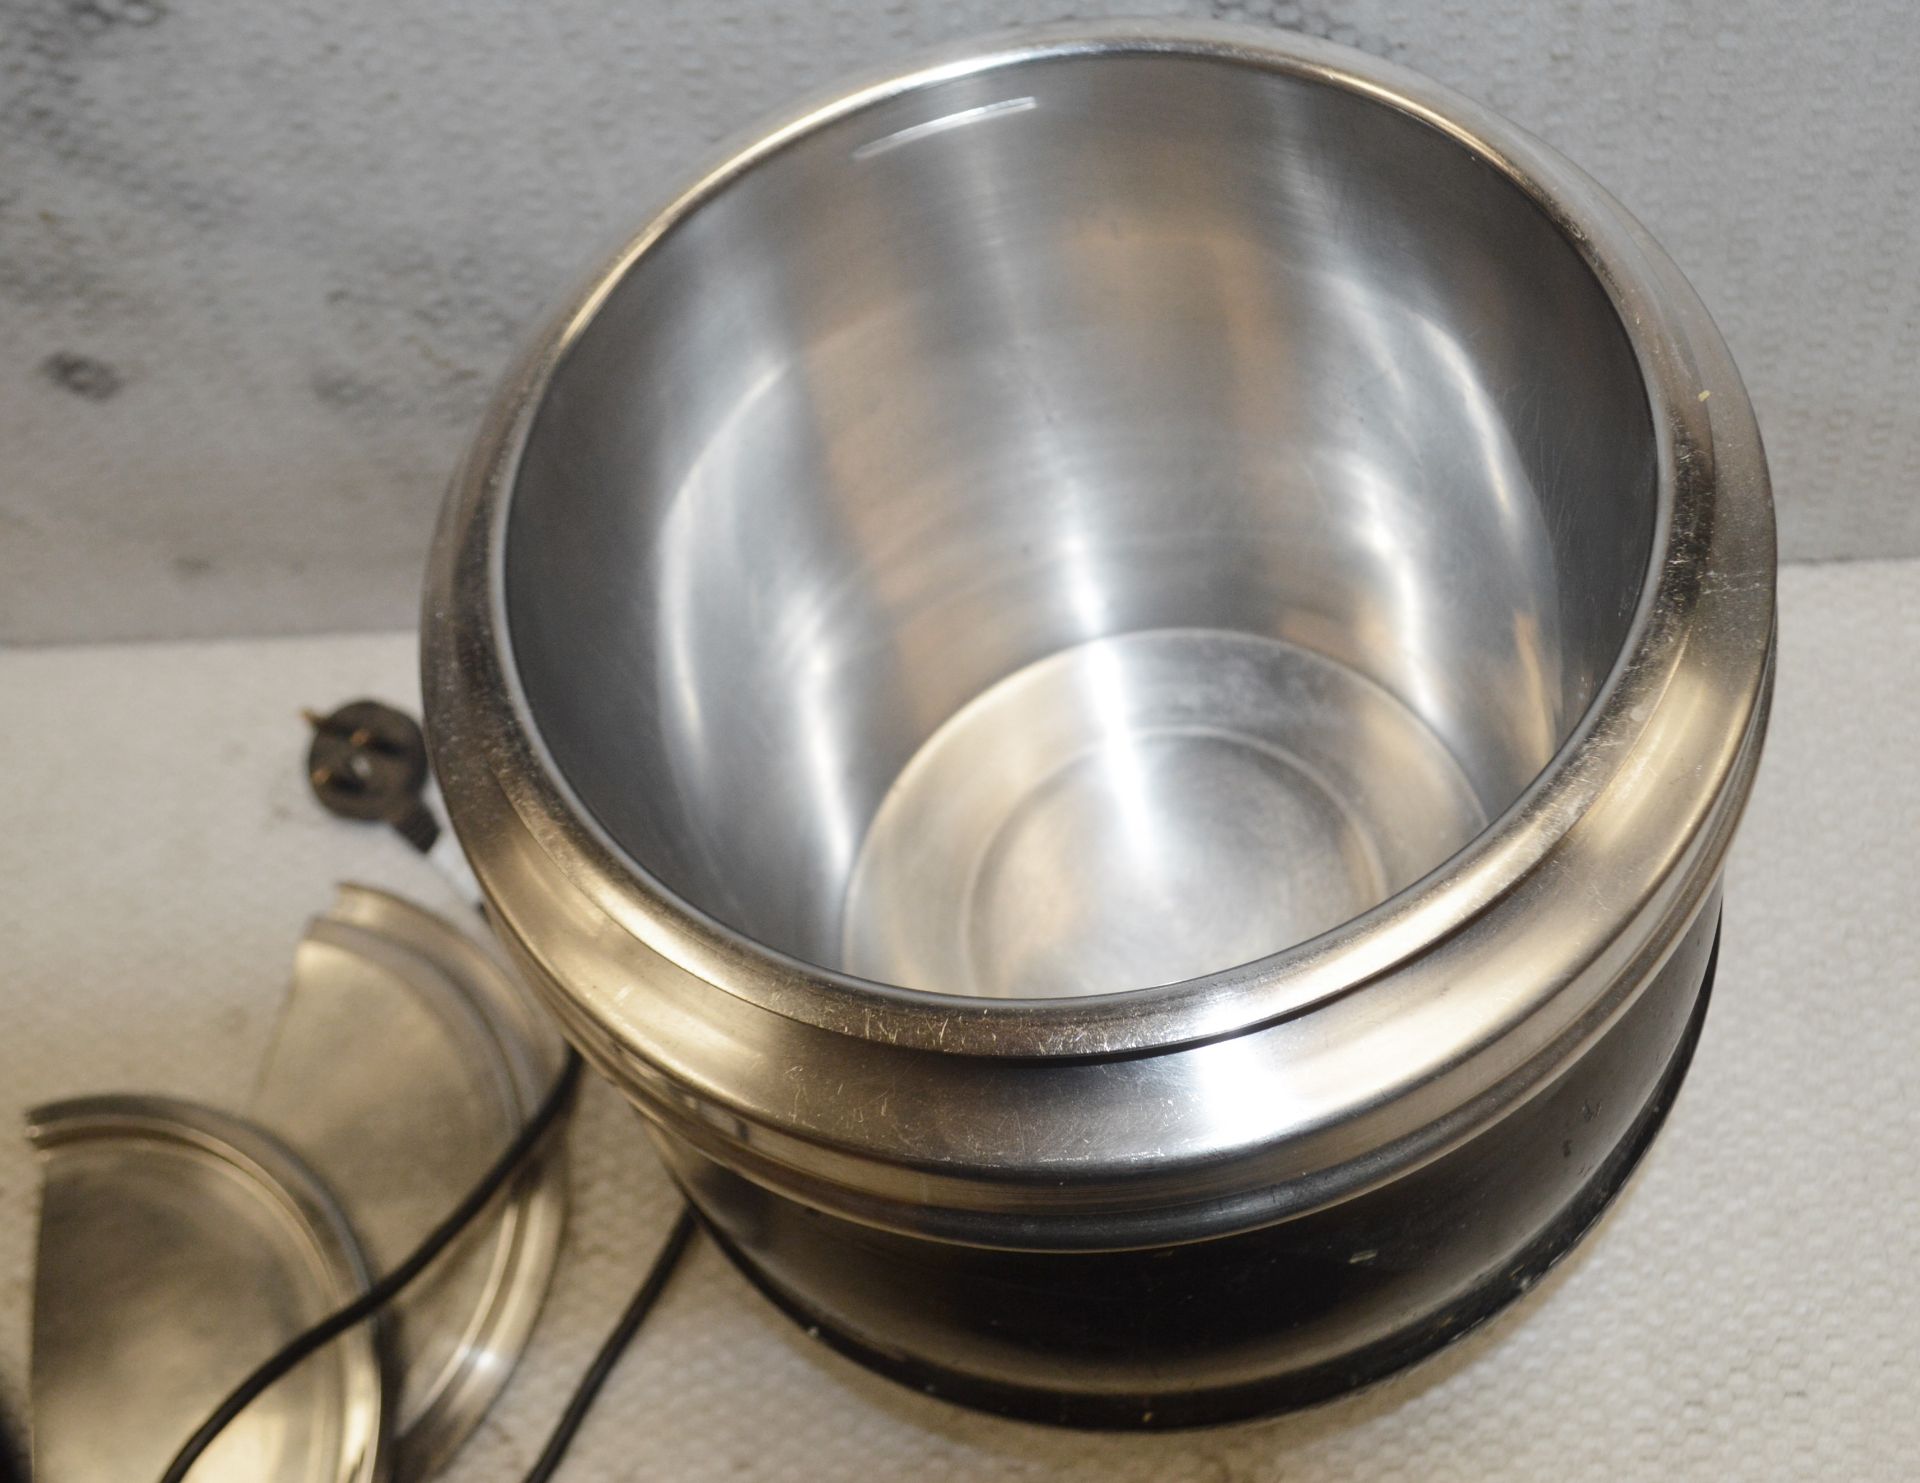 1 x Stainless Steel Dualit Hotpot/Soup Kettle - 11 litre capacity - Dimensions: H38 x W34 cm - - Image 4 of 5